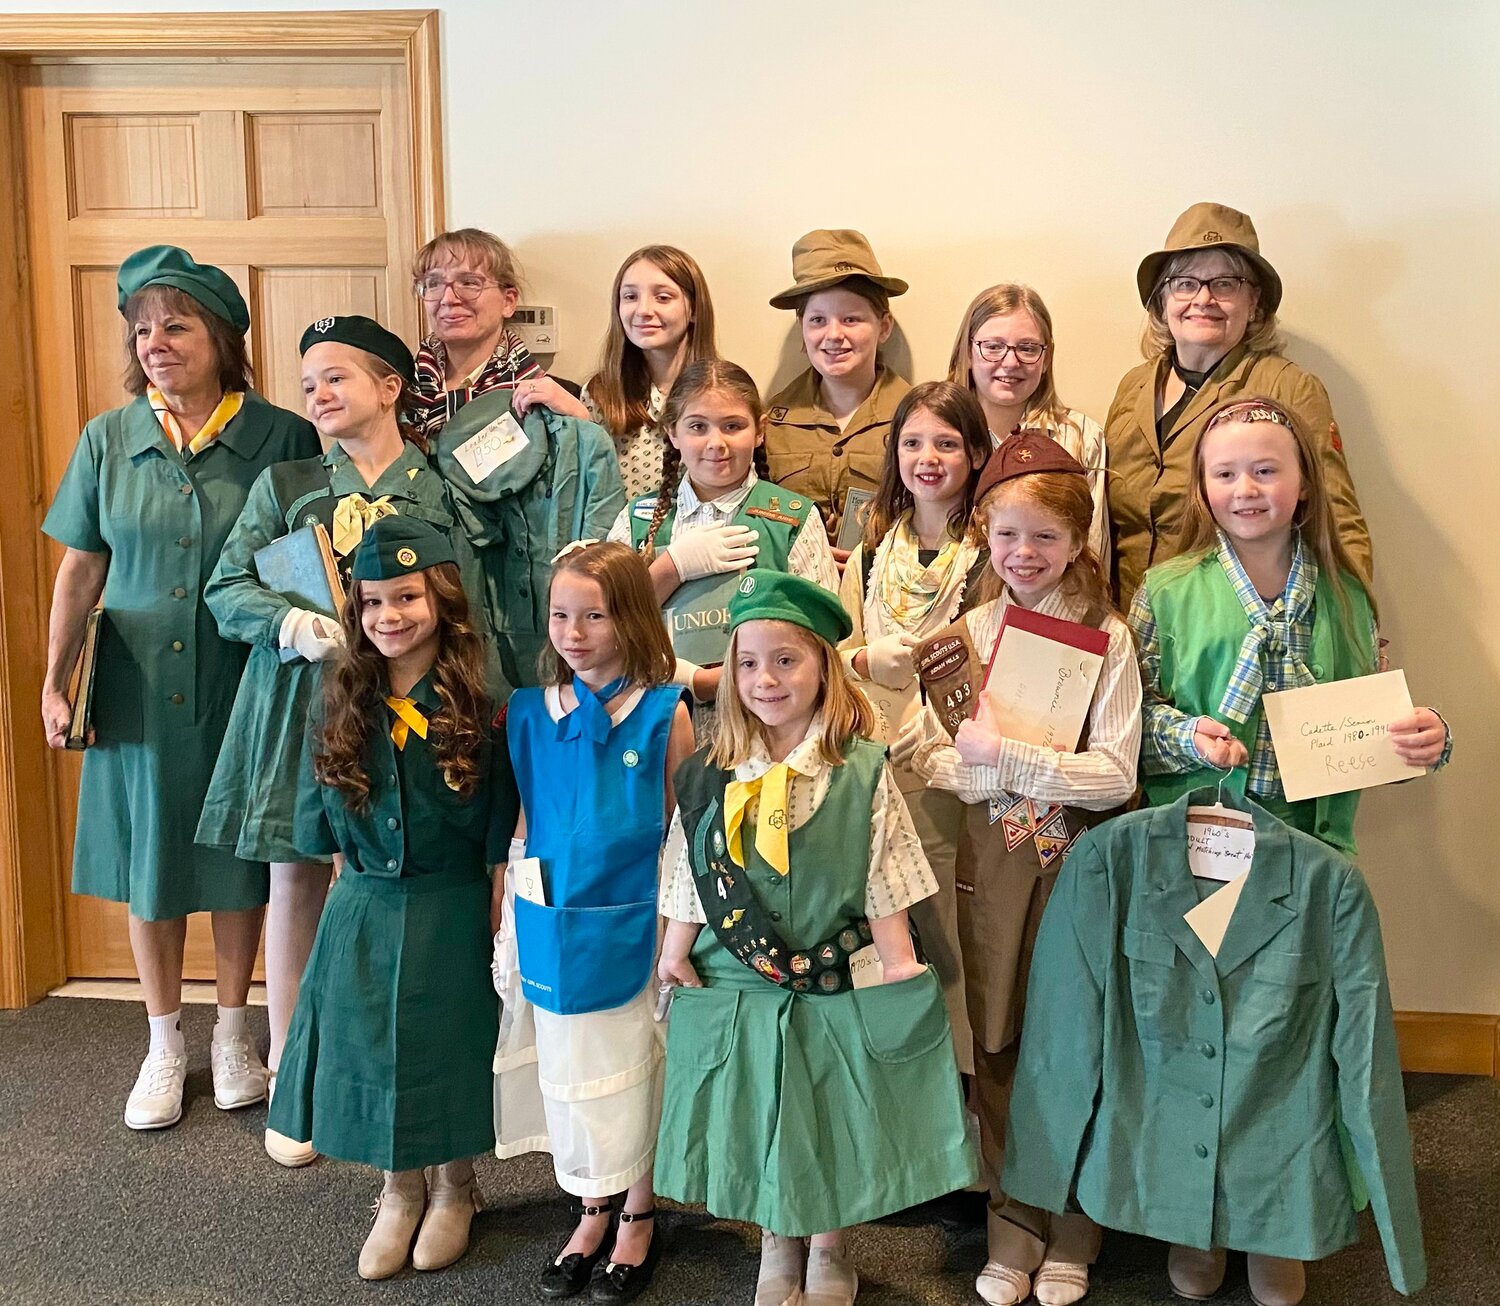 Across the ages: Walton Girl Scouts modeled seven decades of uniforms at a vintage fashion show held Saturday, April 27.